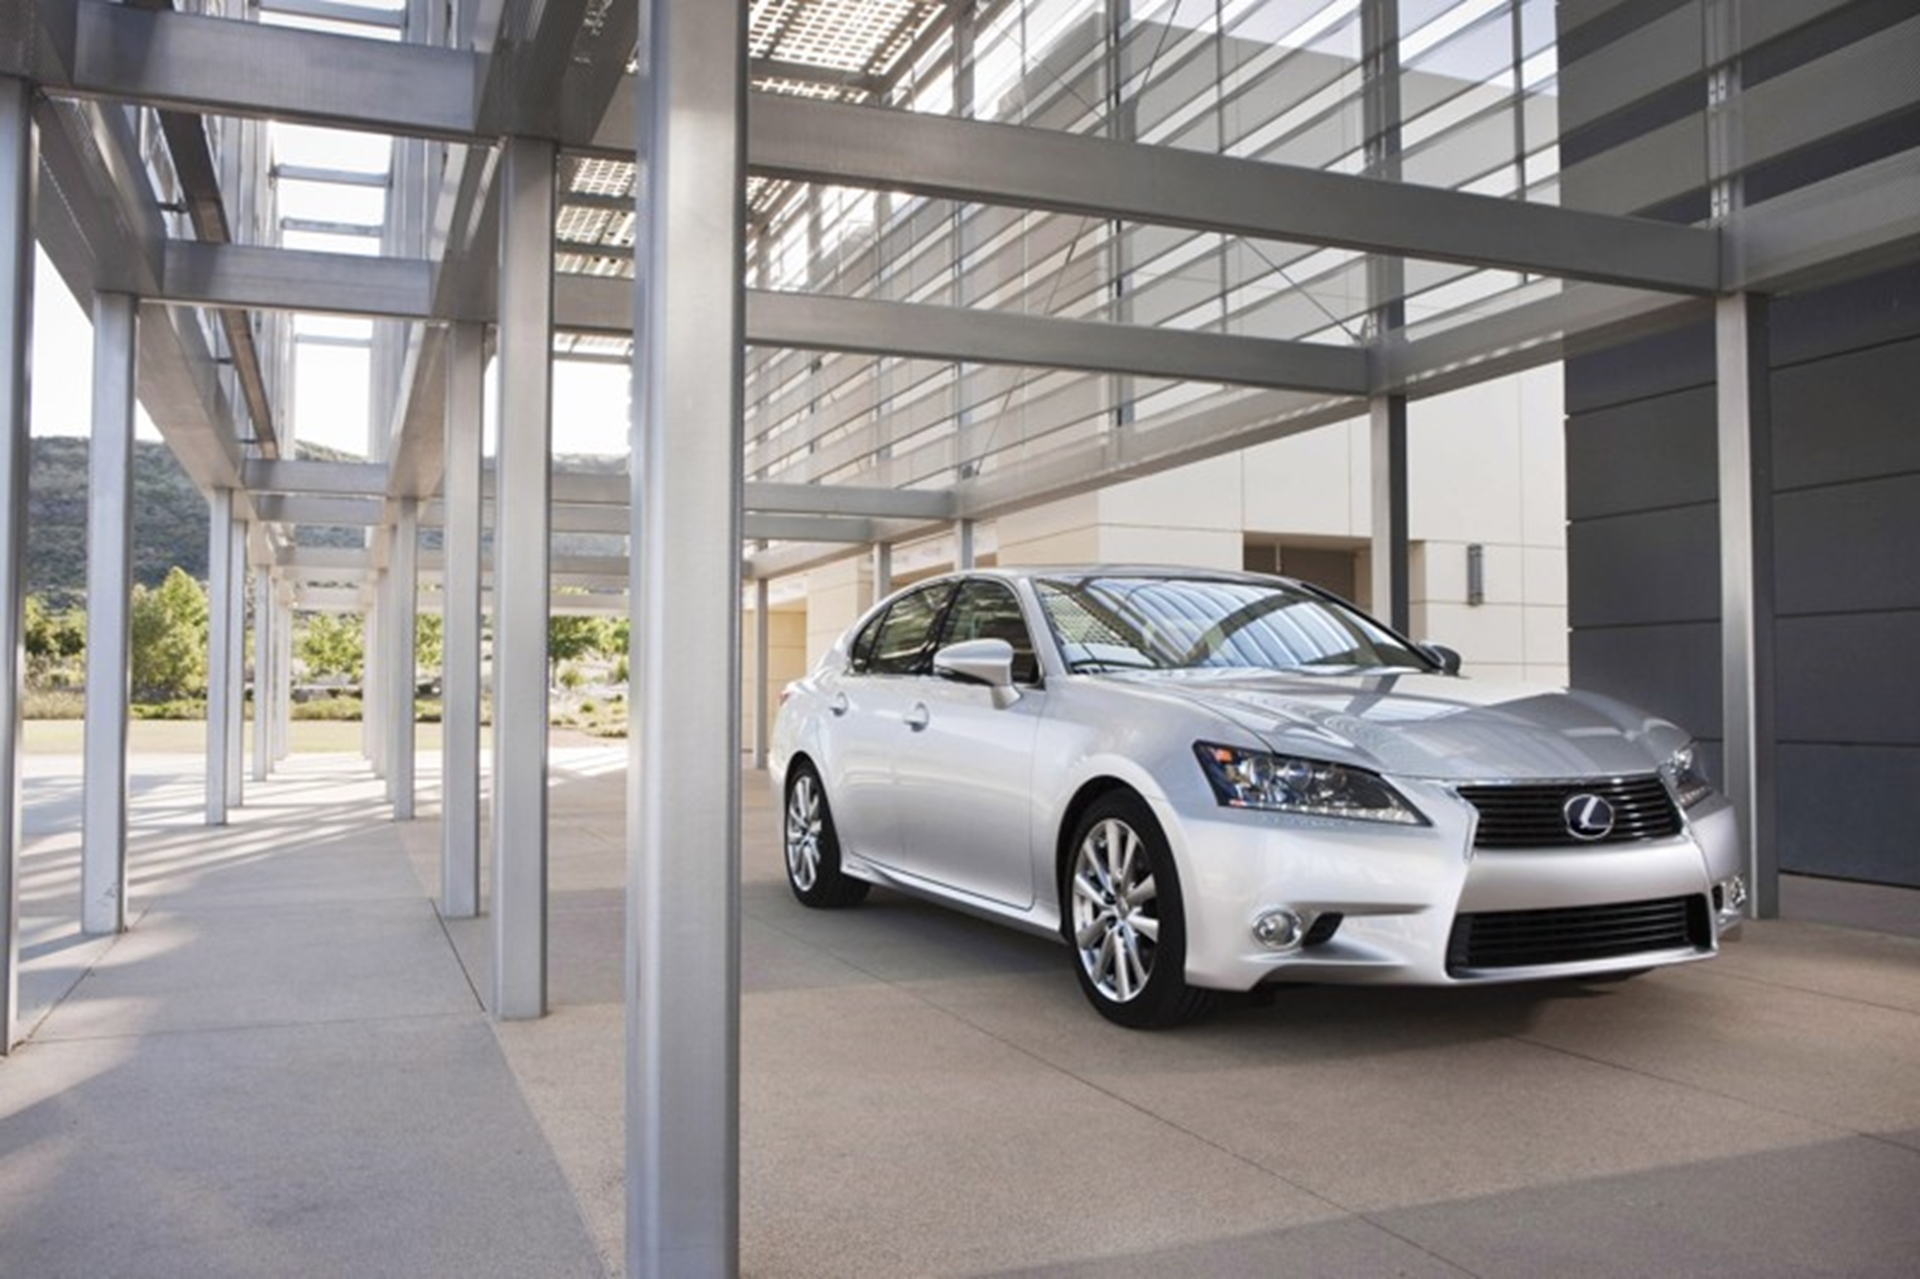 All-New 2013 Lexus GS Family Makes North American Auto Show Debut at Los Angeles Auto Show